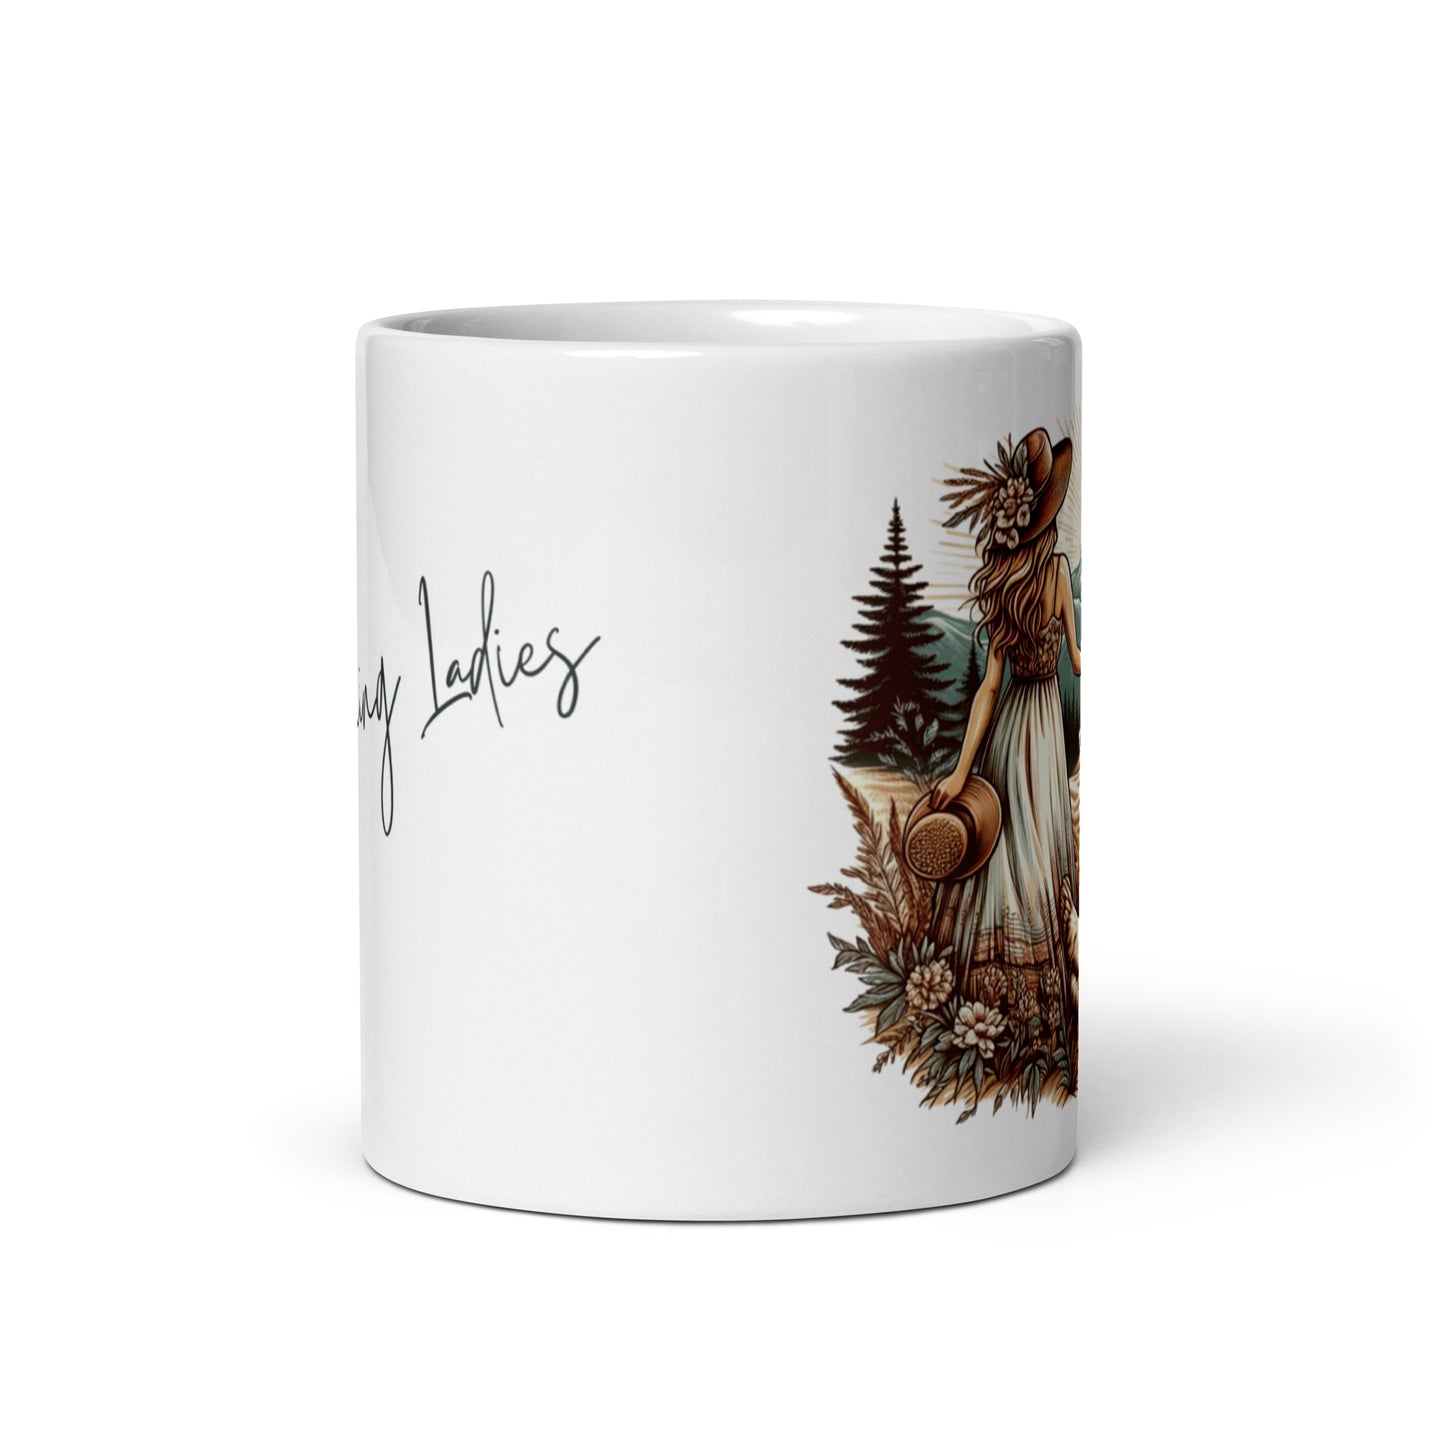 Chicken Theme Coffee Cup - Good Morning Ladies Coffee Cup